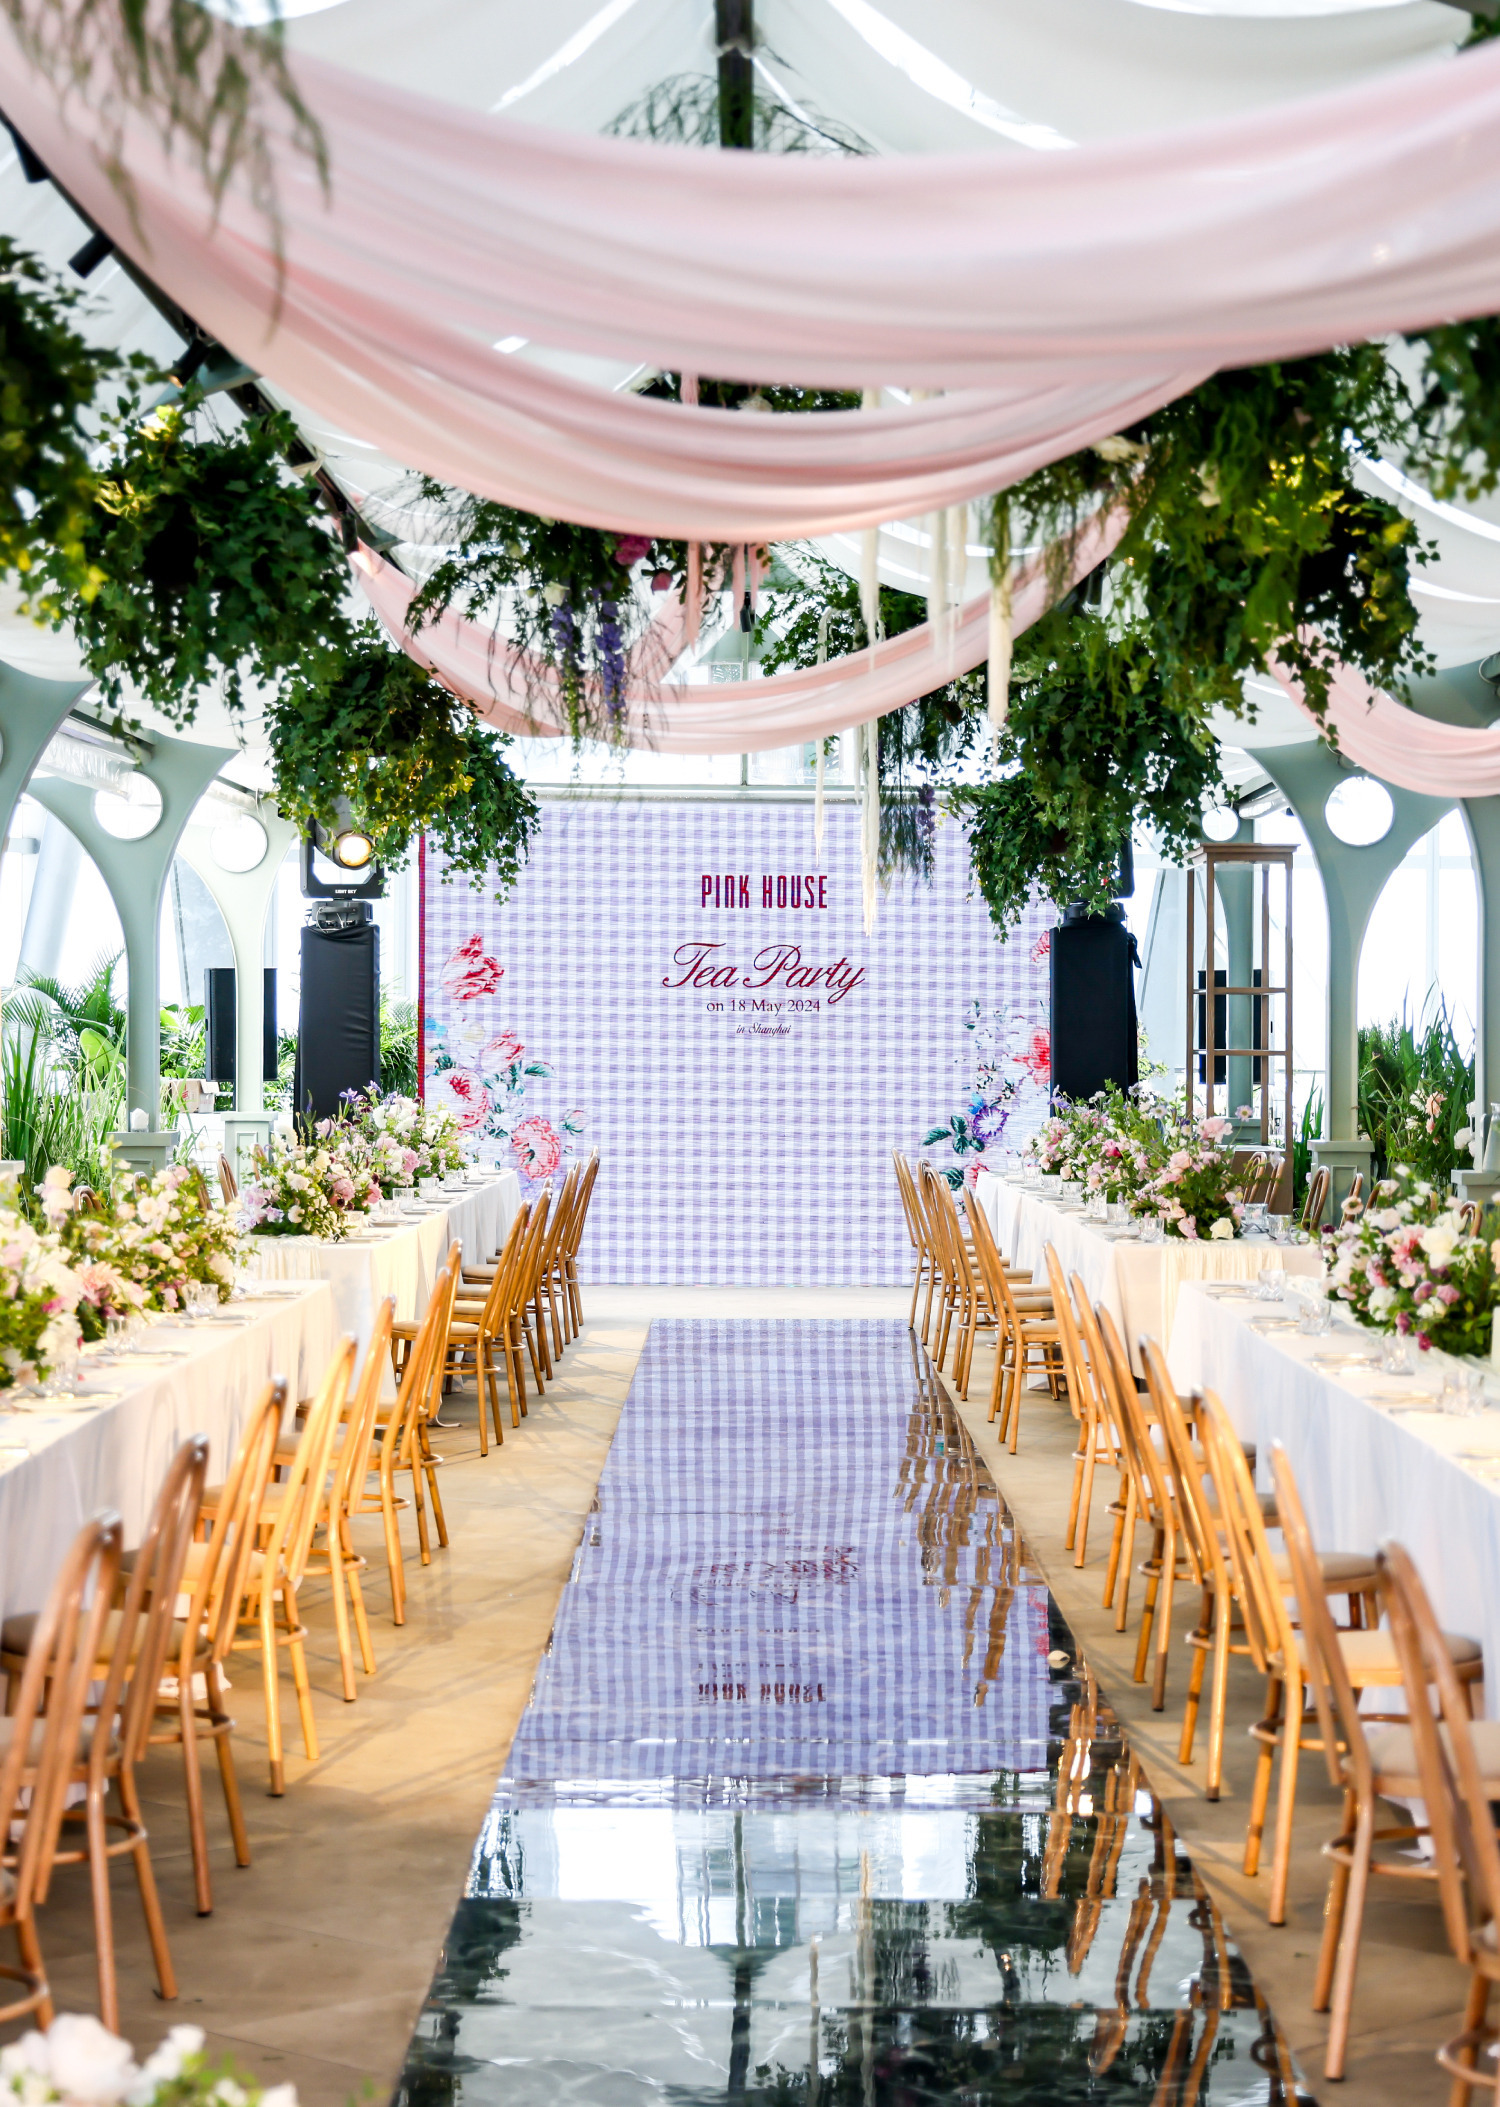 【EVENT REPORT】PINK HOUSE GARDEN 2024SS Tea Party in Shanghai 5/18(sat)